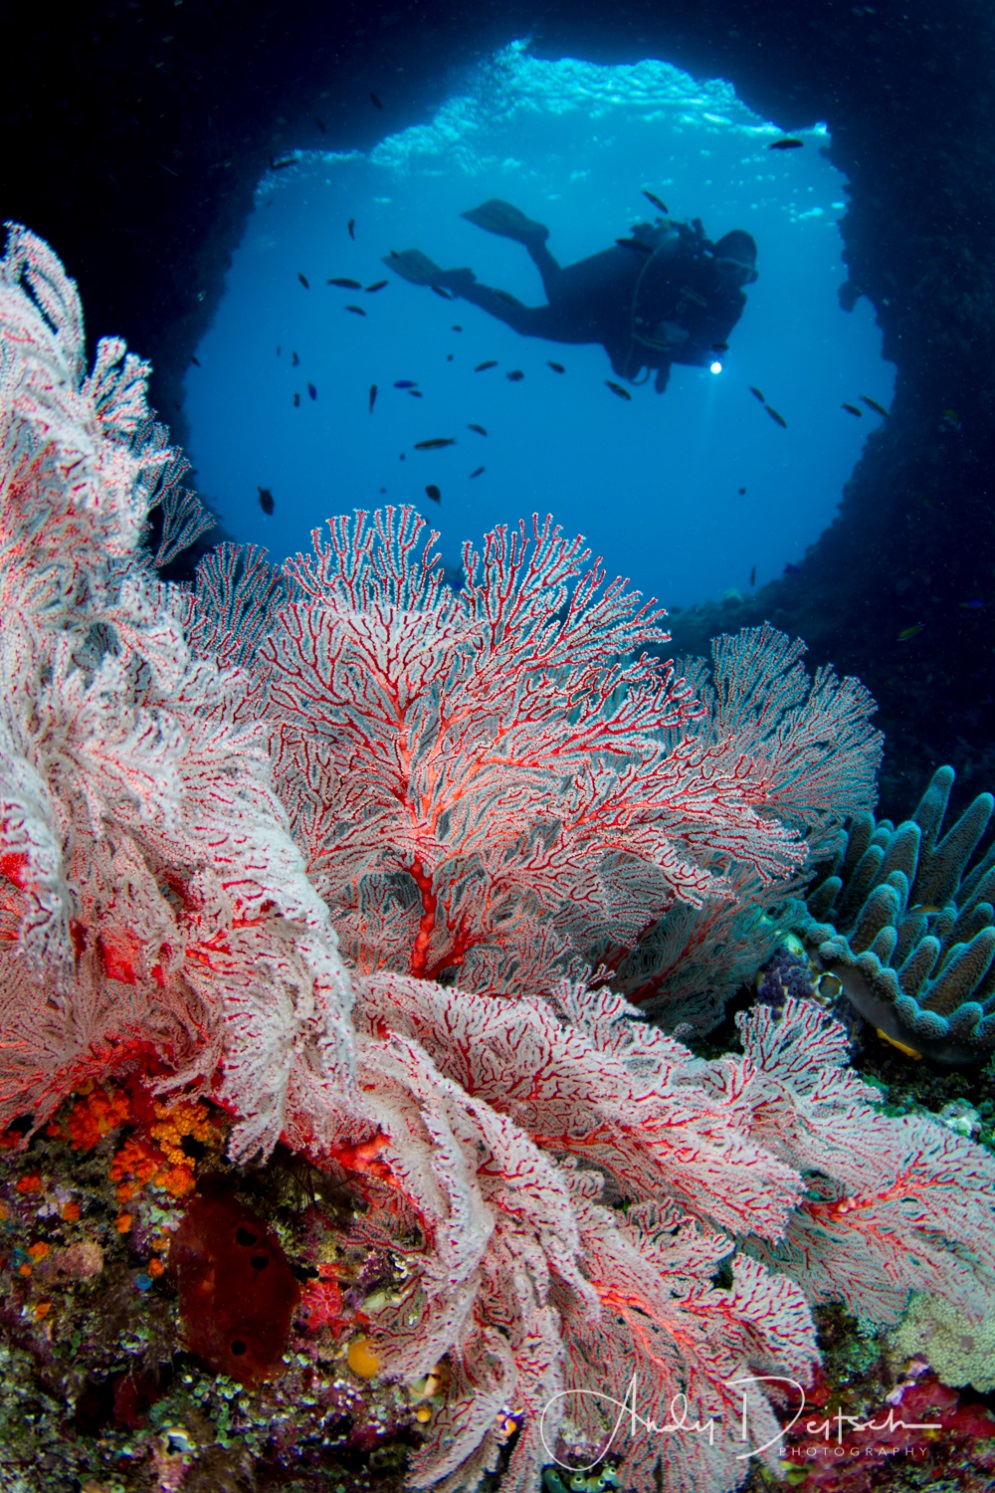 A close up of a coral Description automatically generated